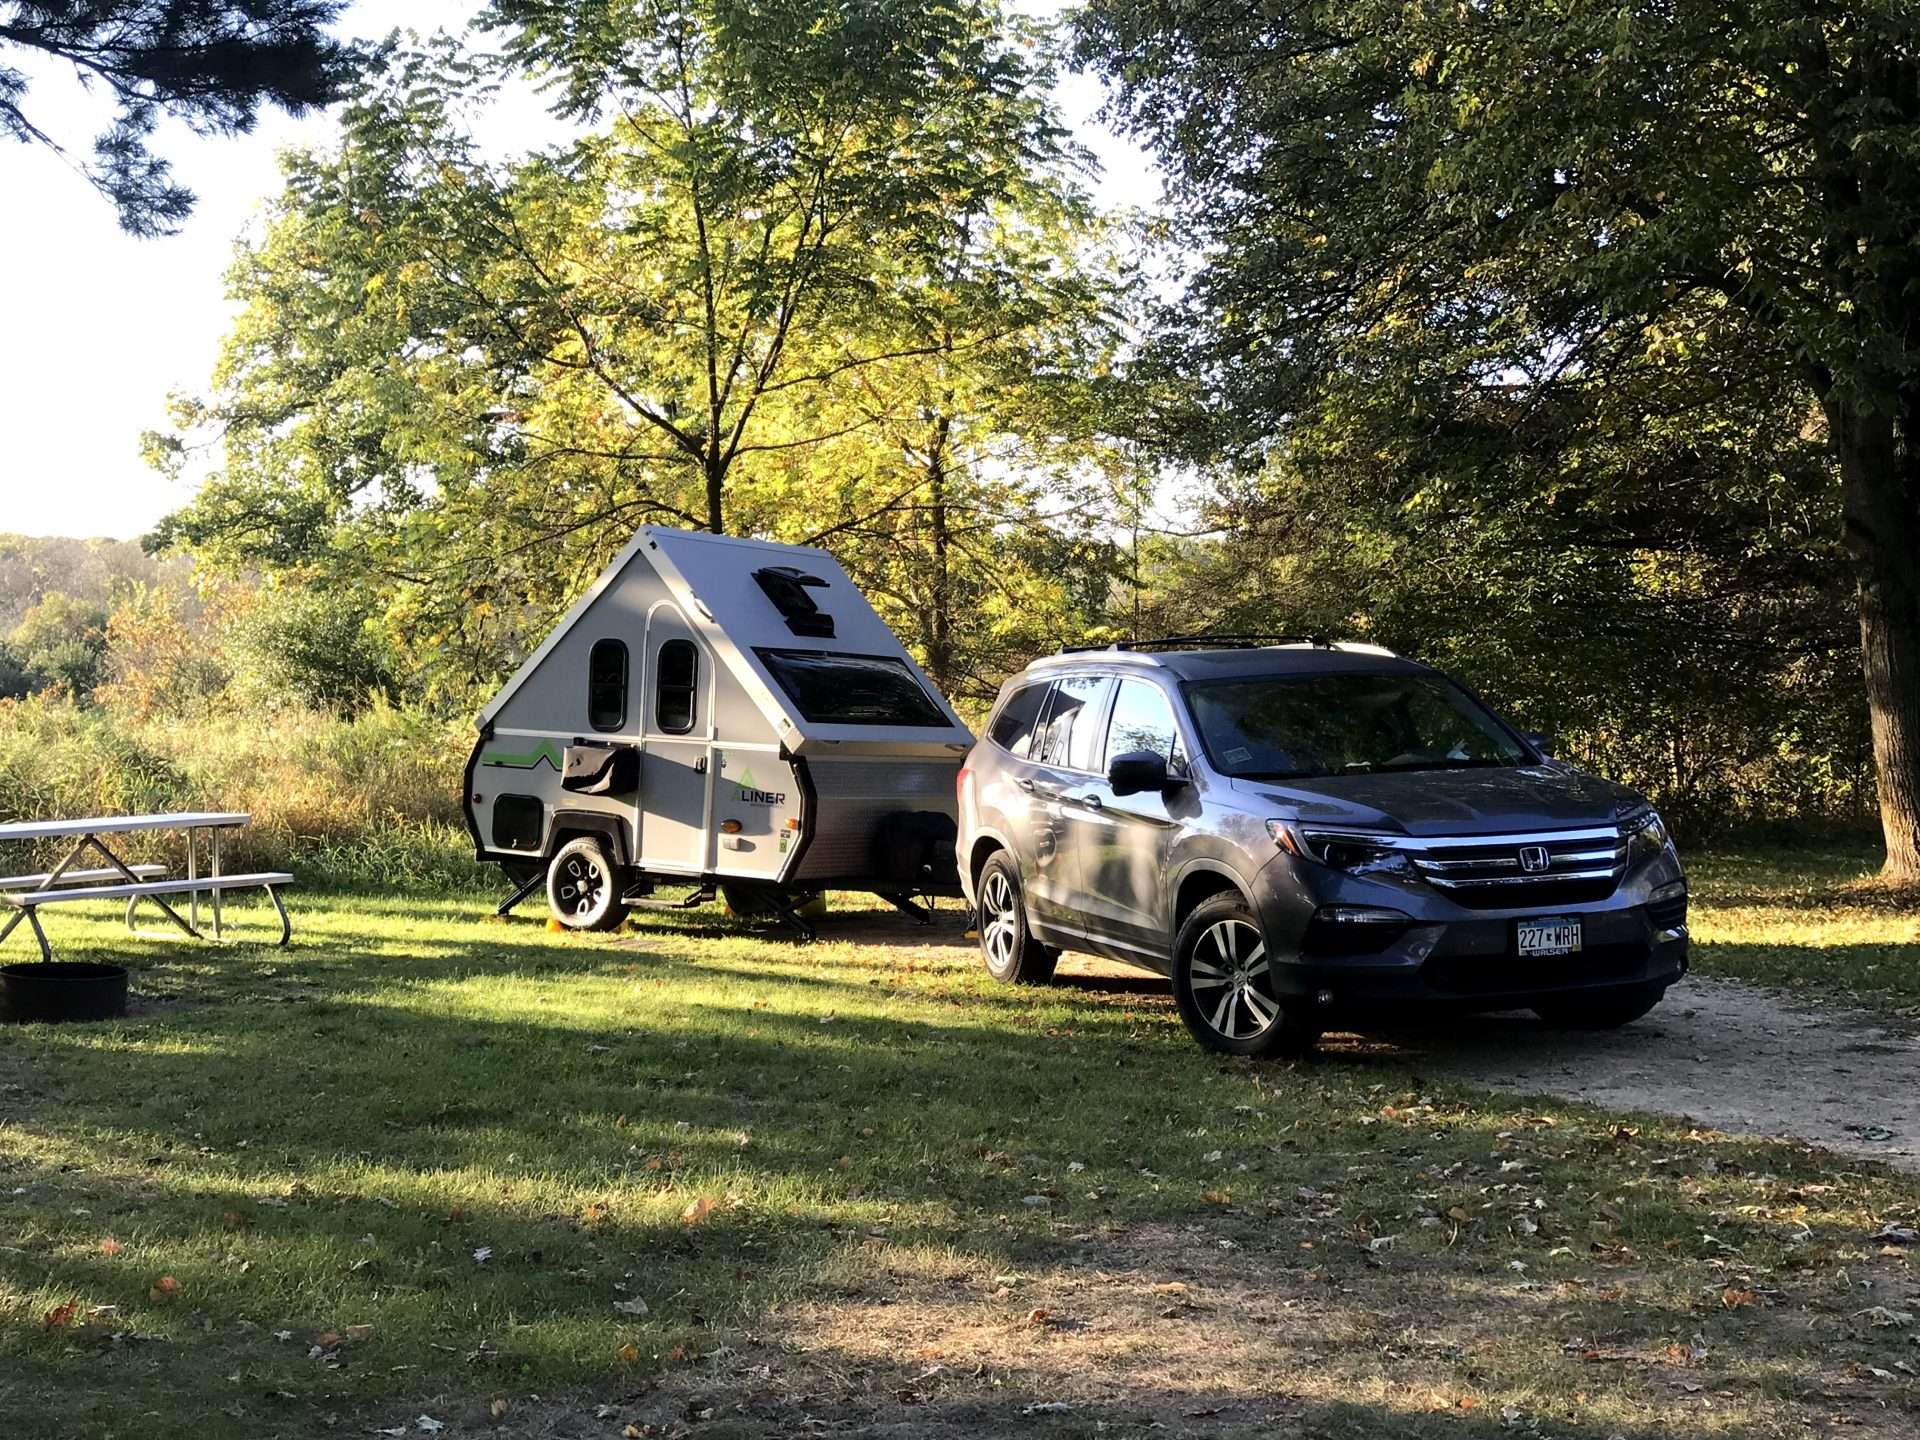 SUV towing camper